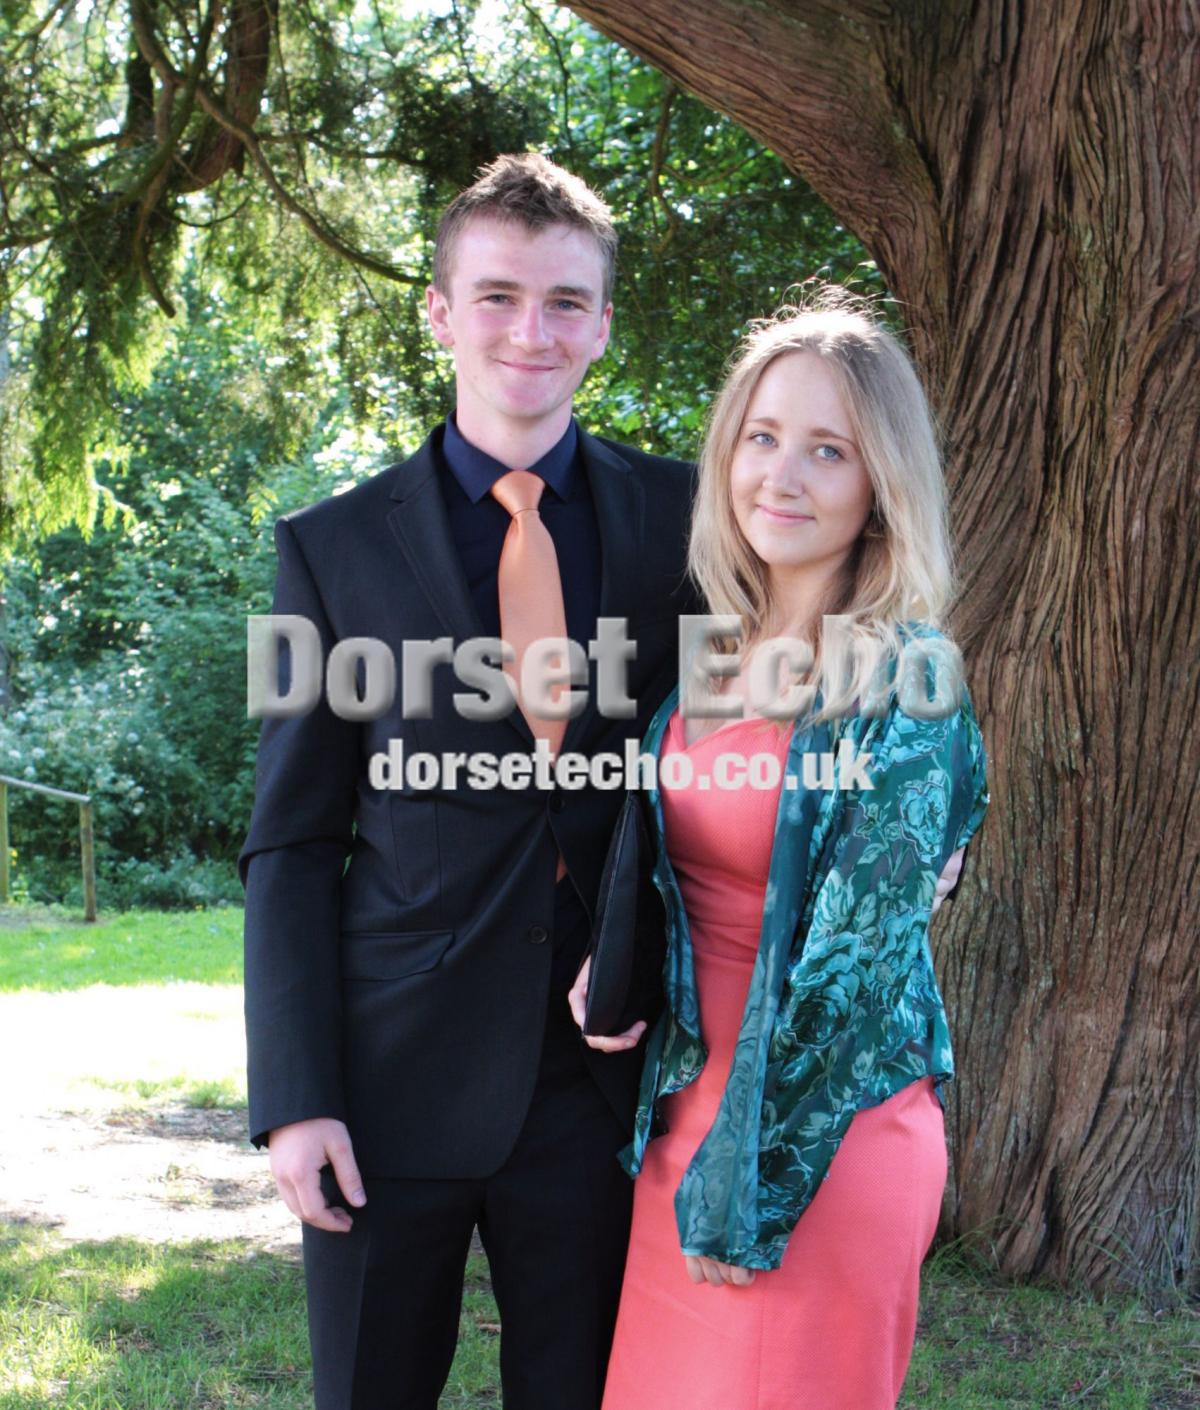 Students dressed to impress at their sixth form ball